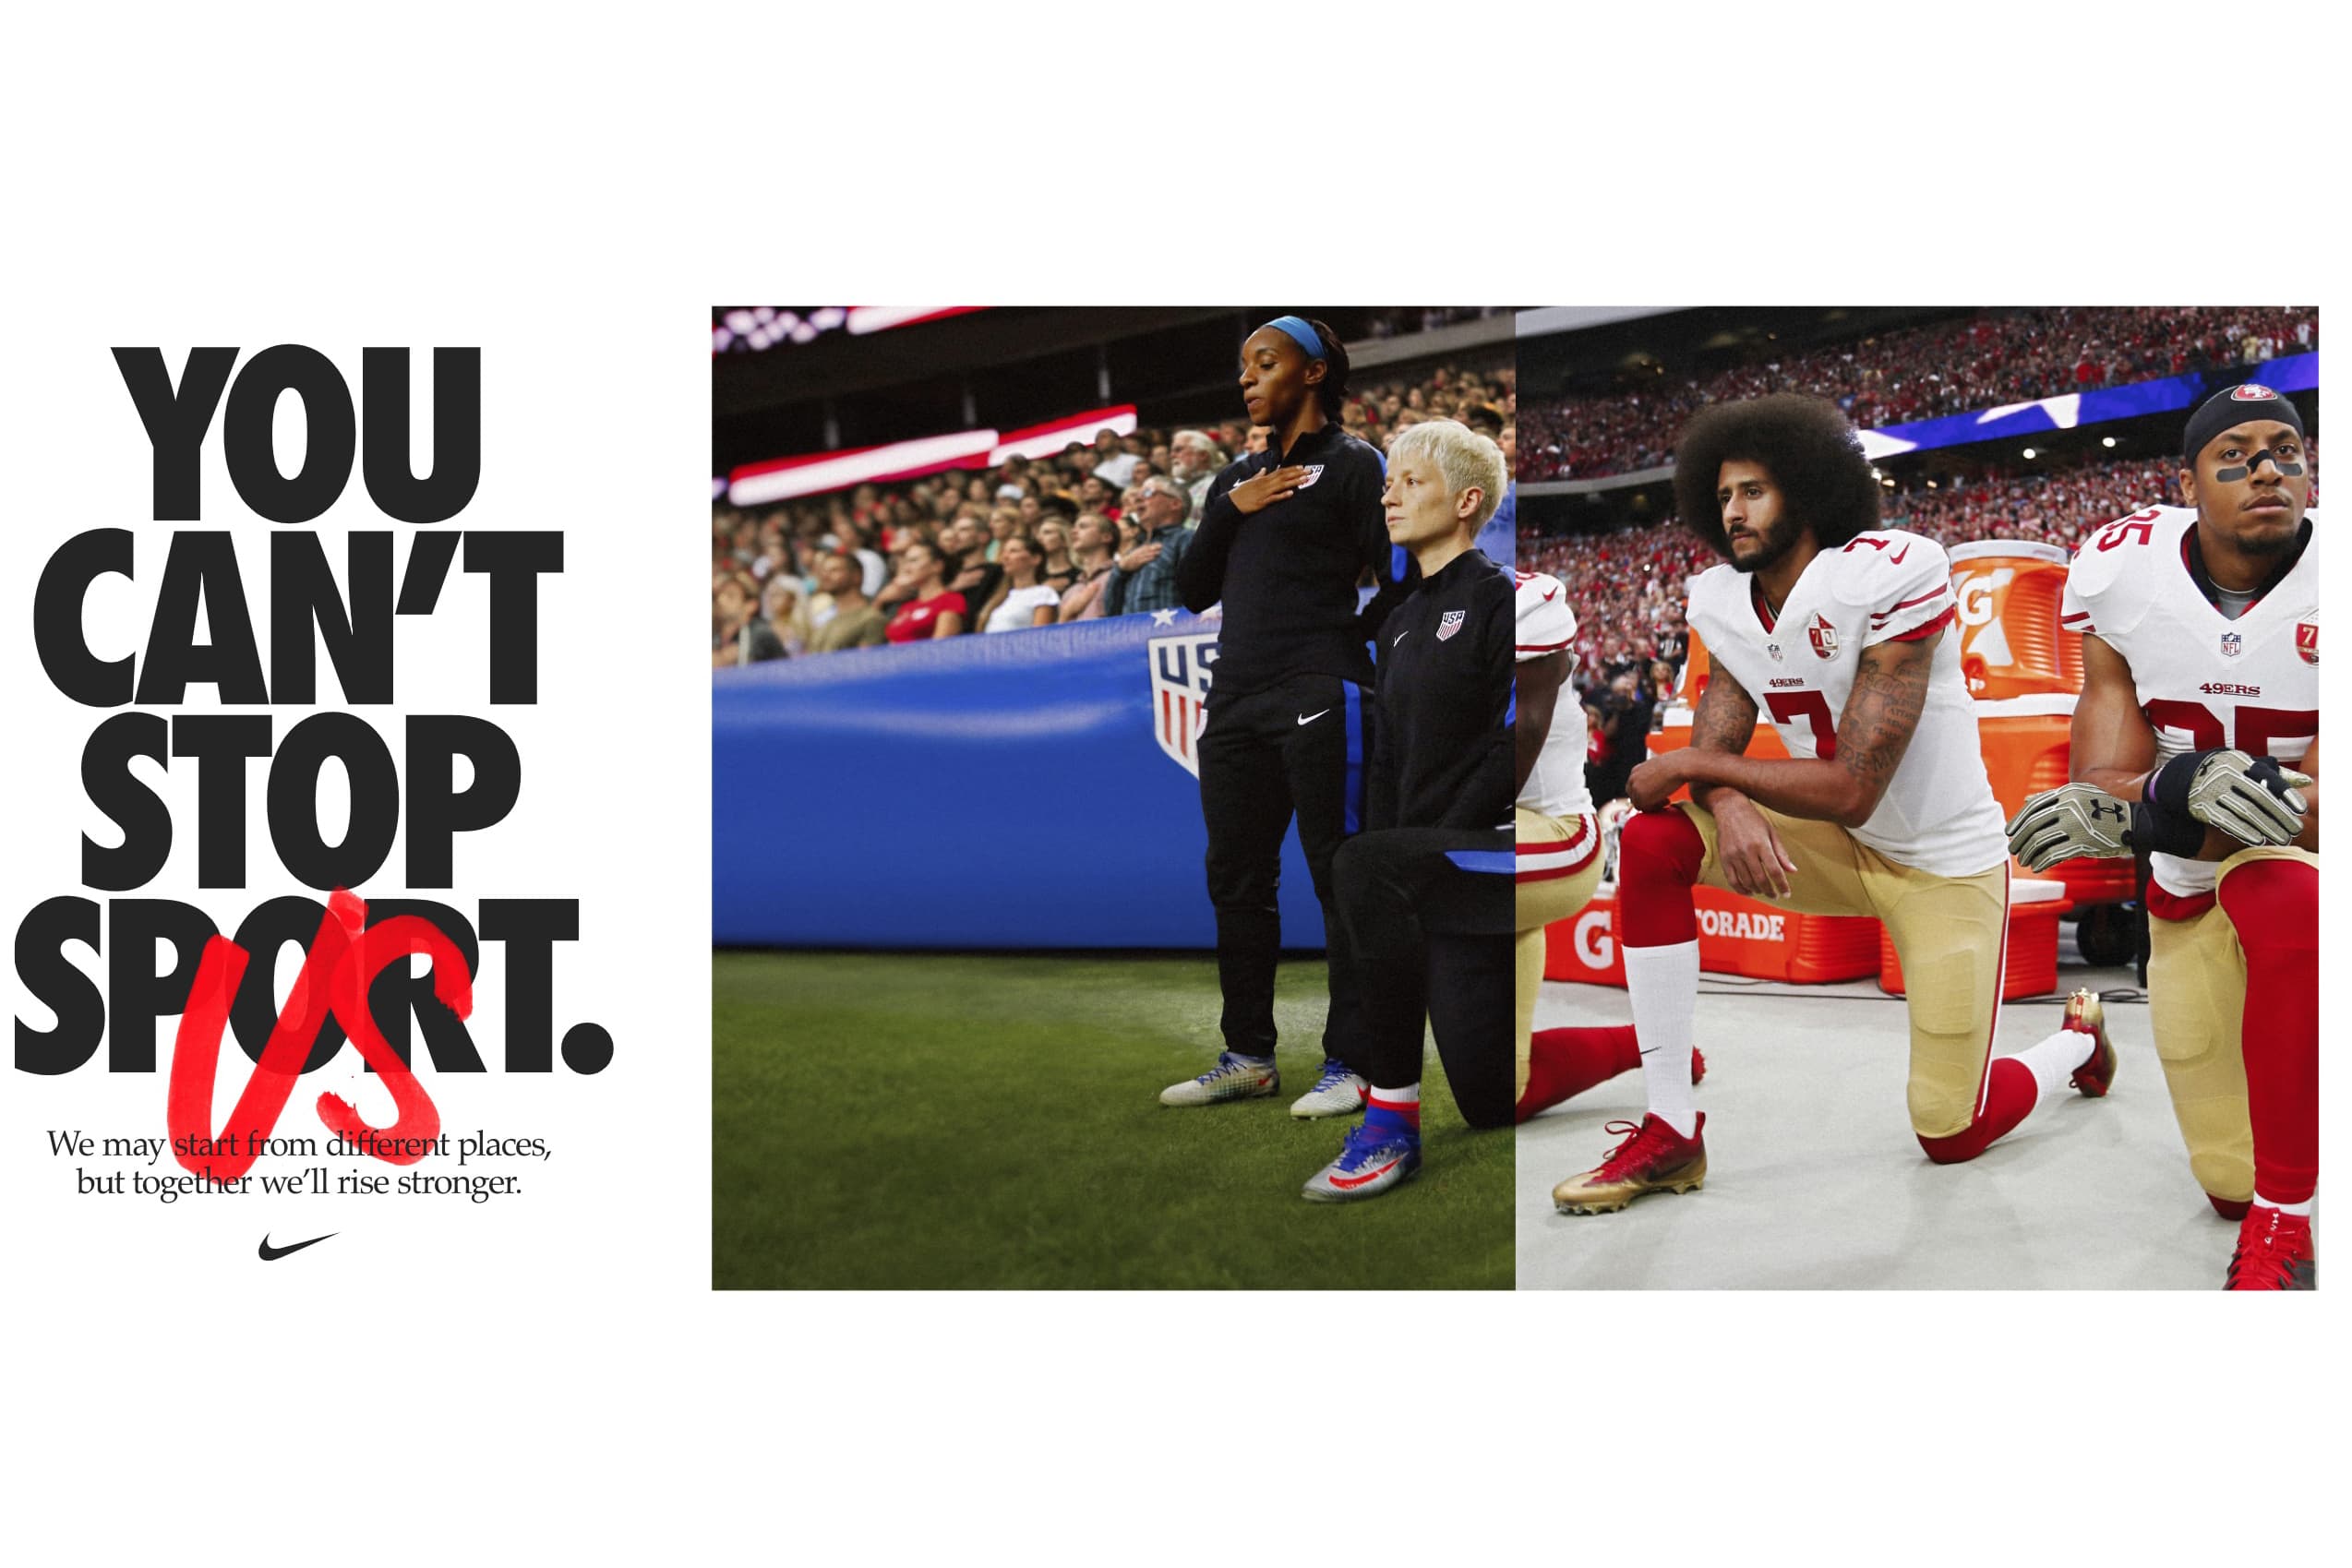 Megan Rapinoe out about race and change, in Nike campaign